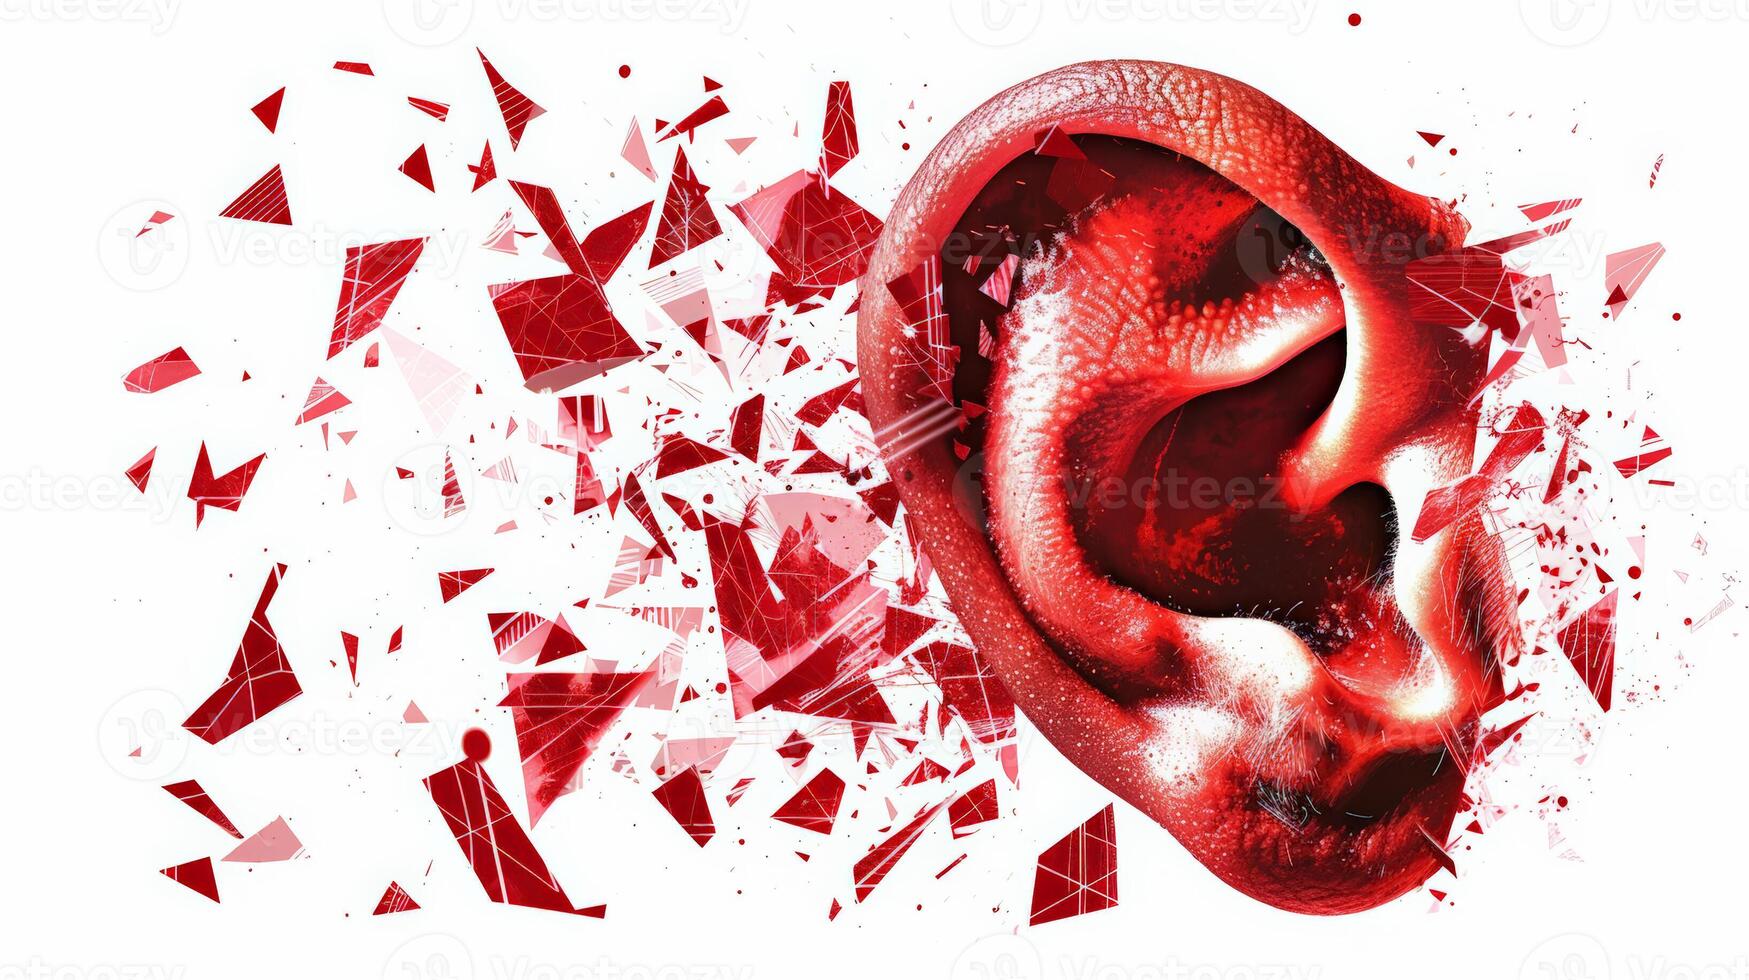 Noise pollution concept with a shattered eardrum illustration, vibrant red against white background photo